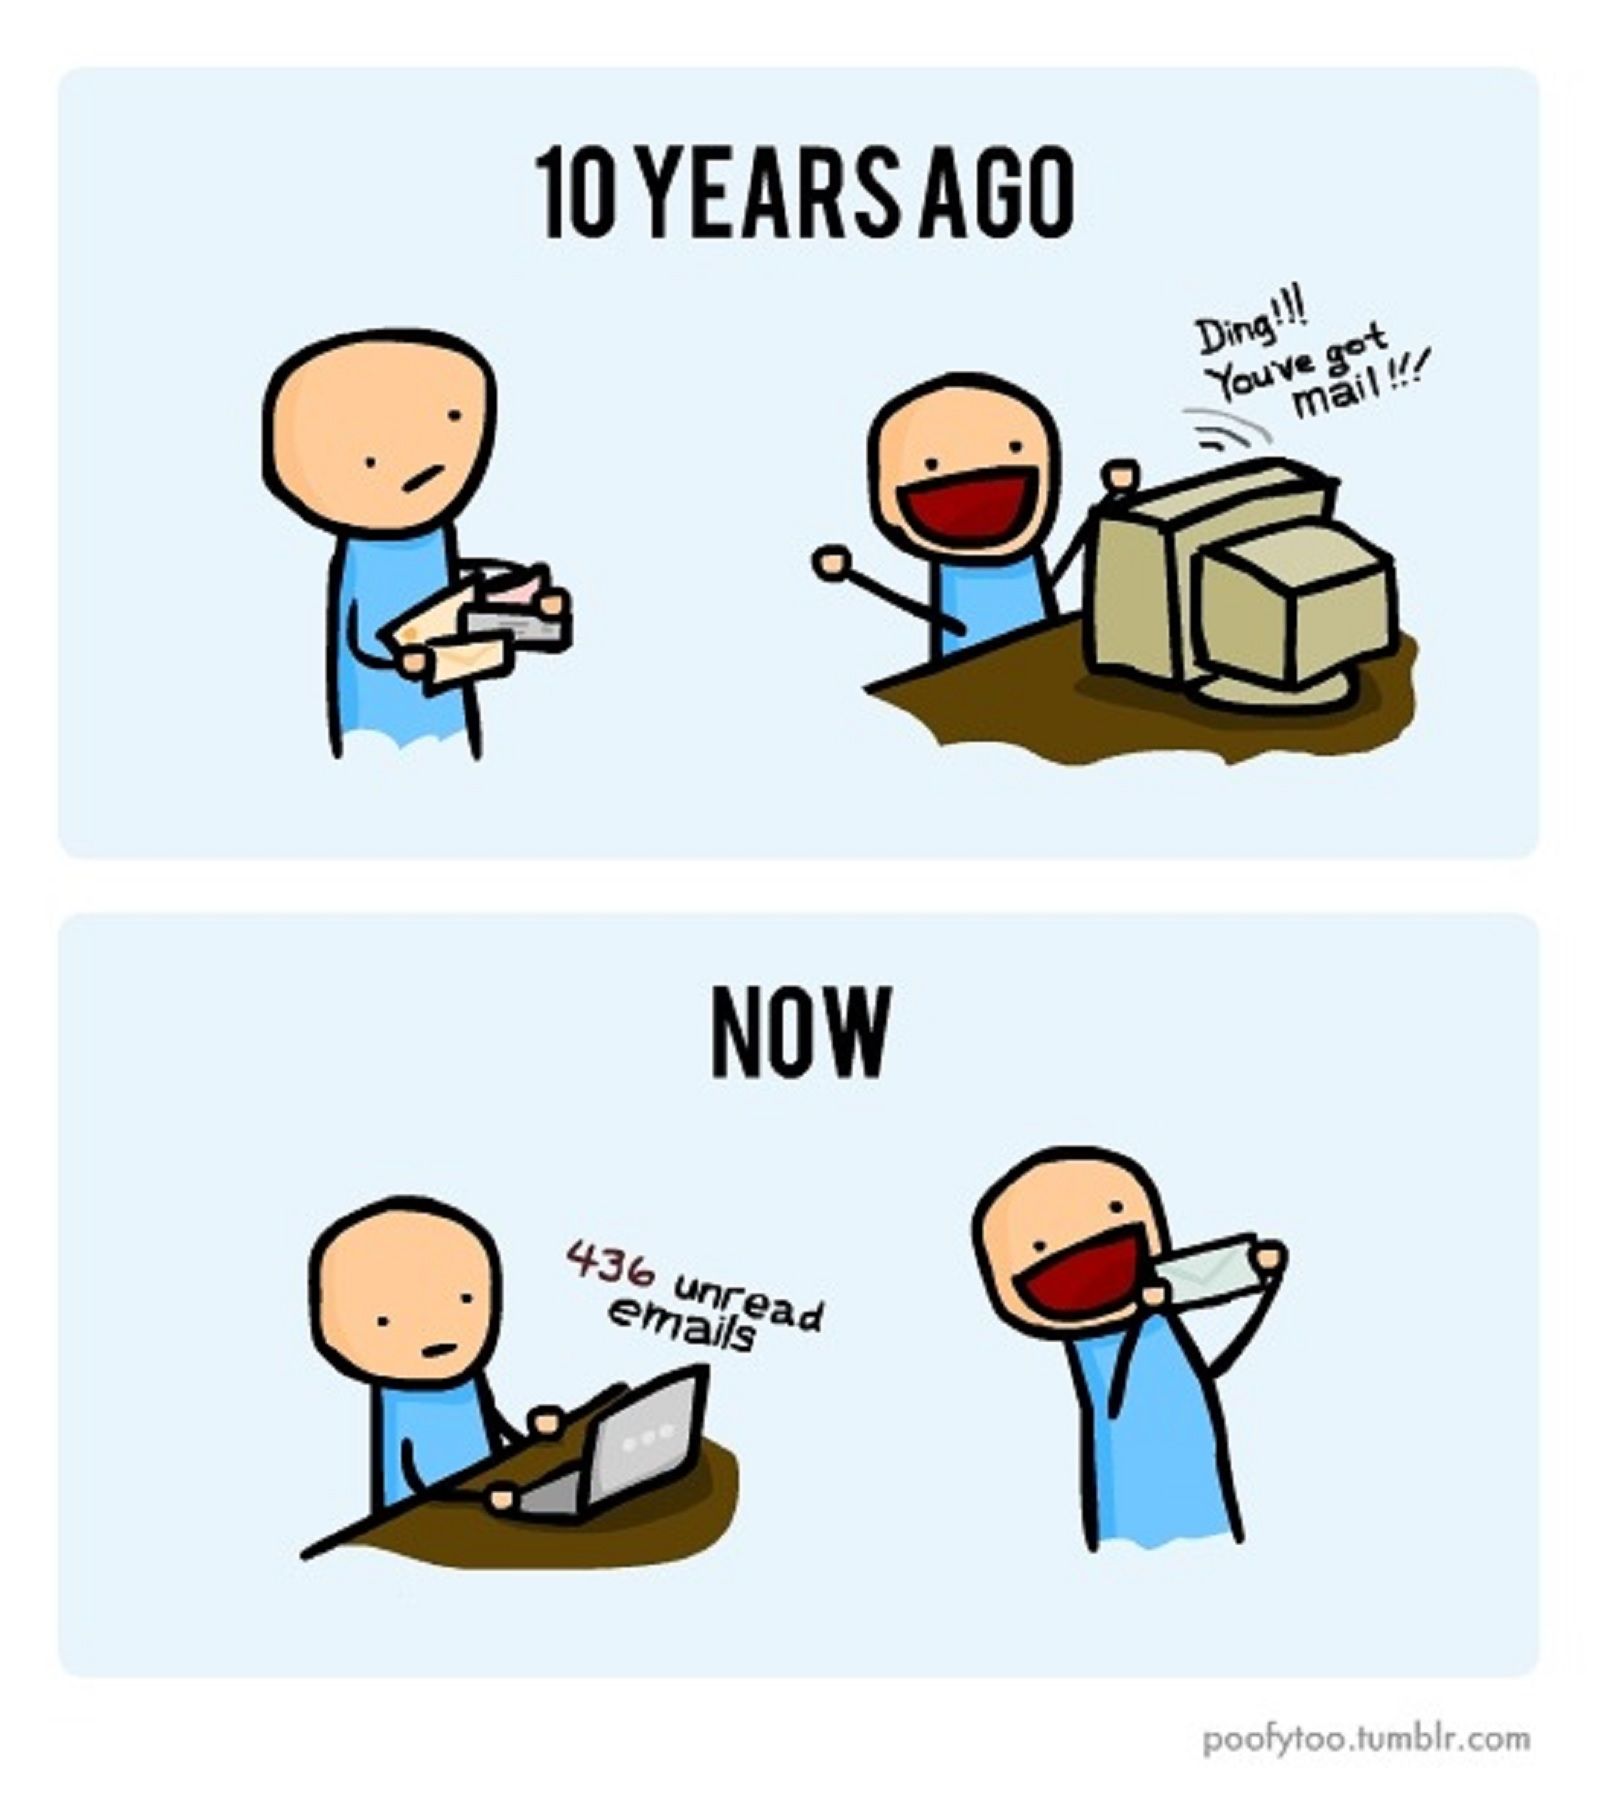 36 hilarious ways technology has changed us for the worse image 32